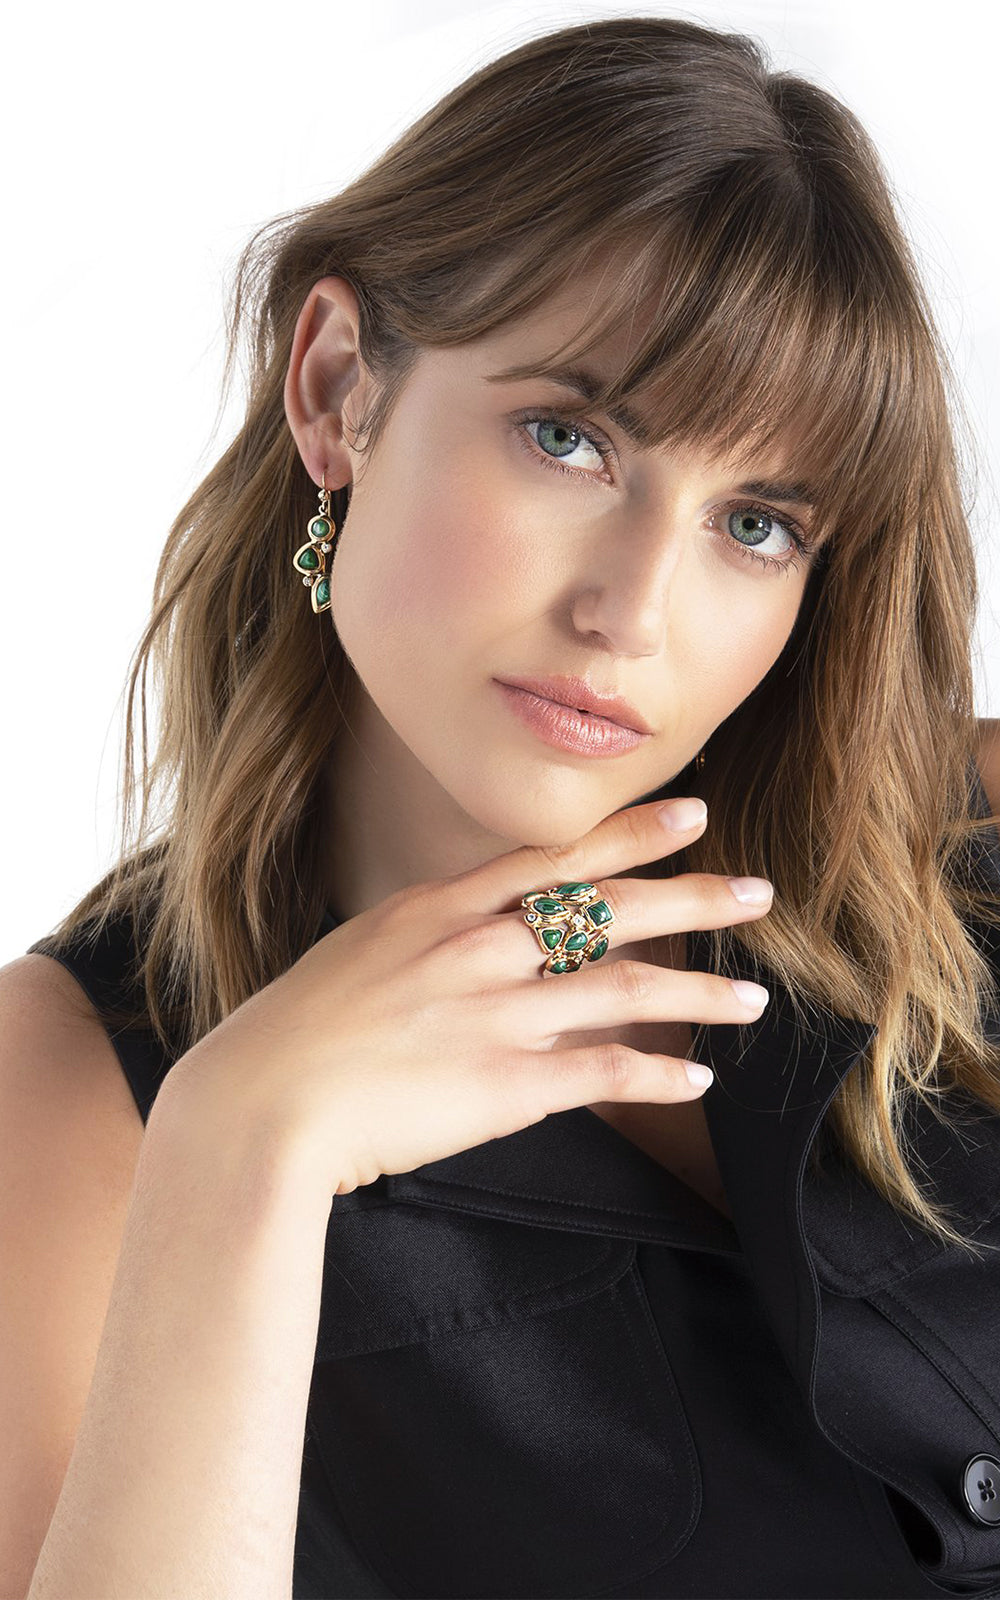 Darby Scott Model with Cocktail Ring and Earring